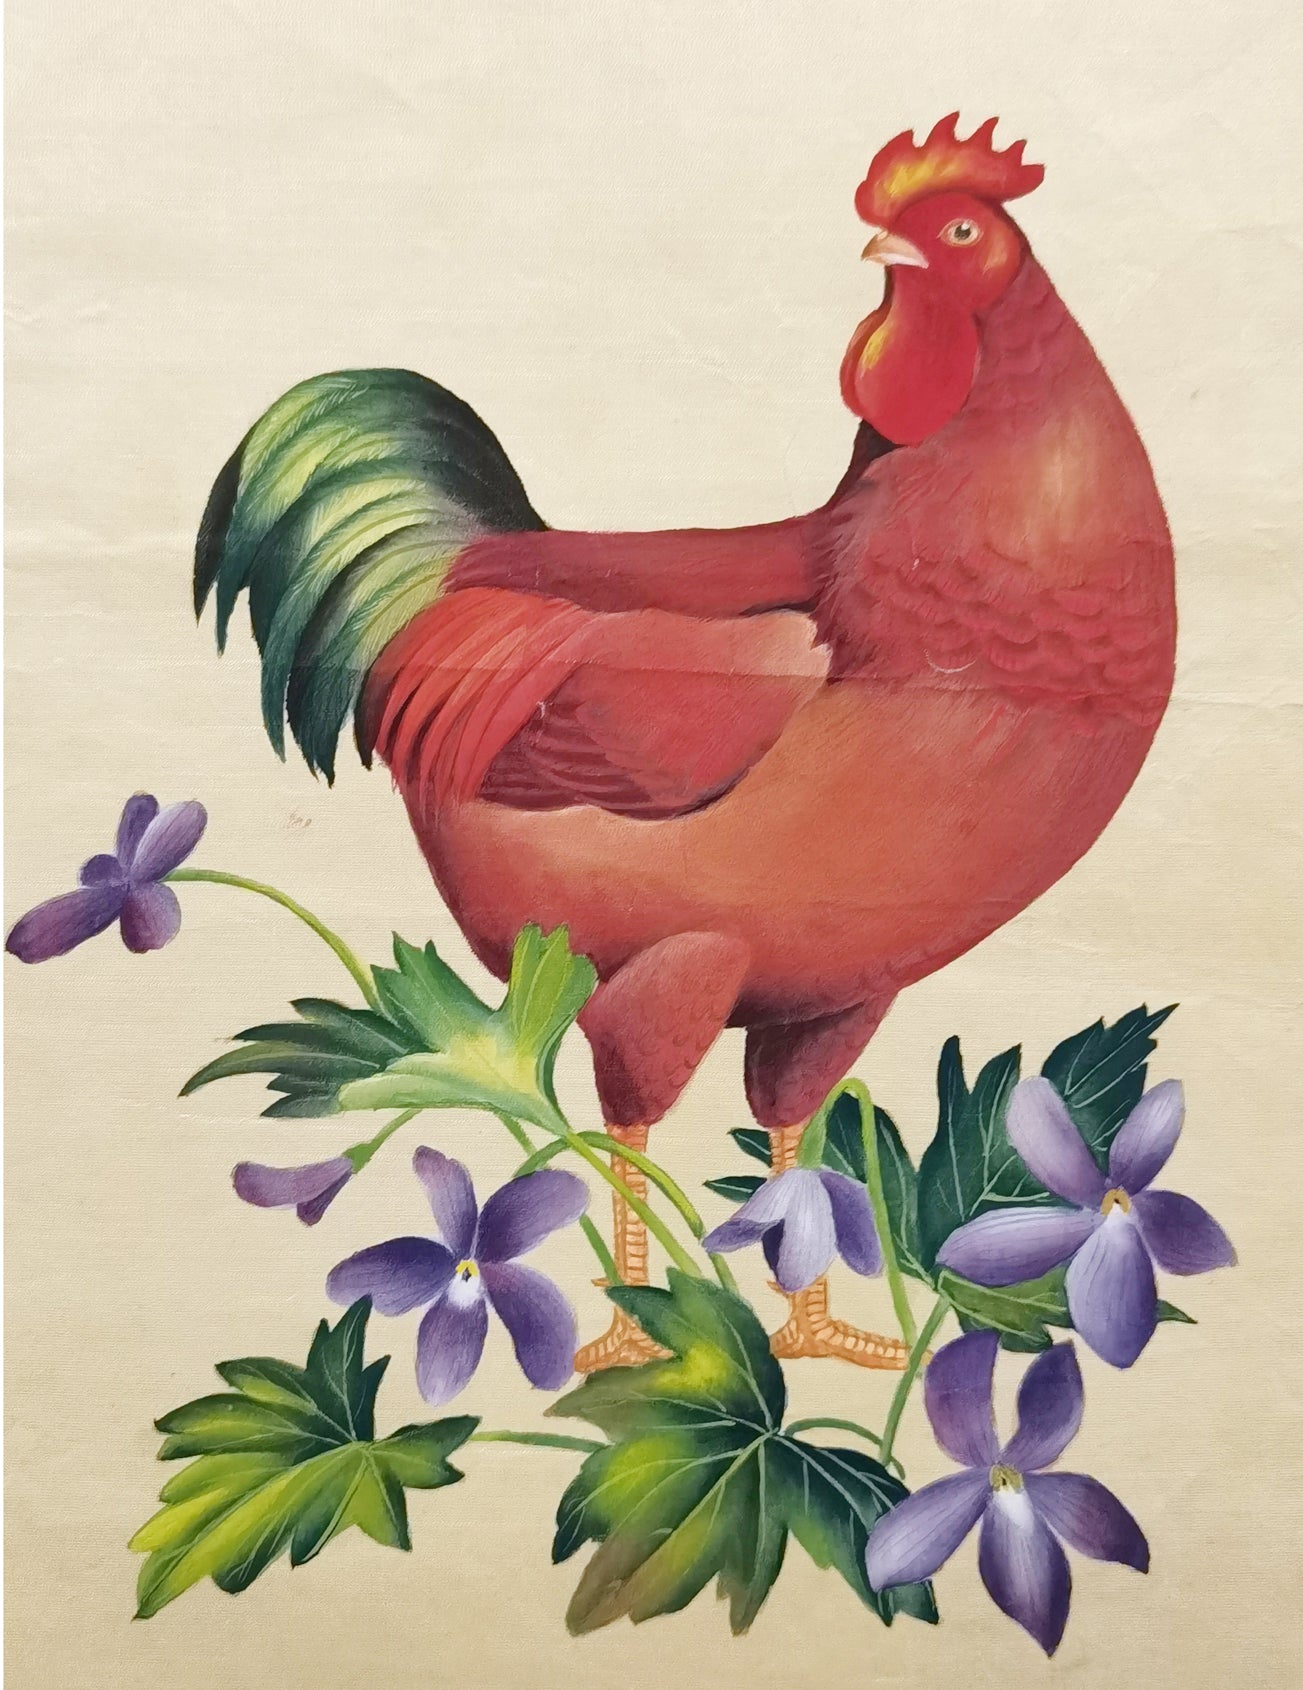 Rhode Island Grand Red Rooster State Bird Handmade Art Printing Rhode Island Violet with Wood Frame